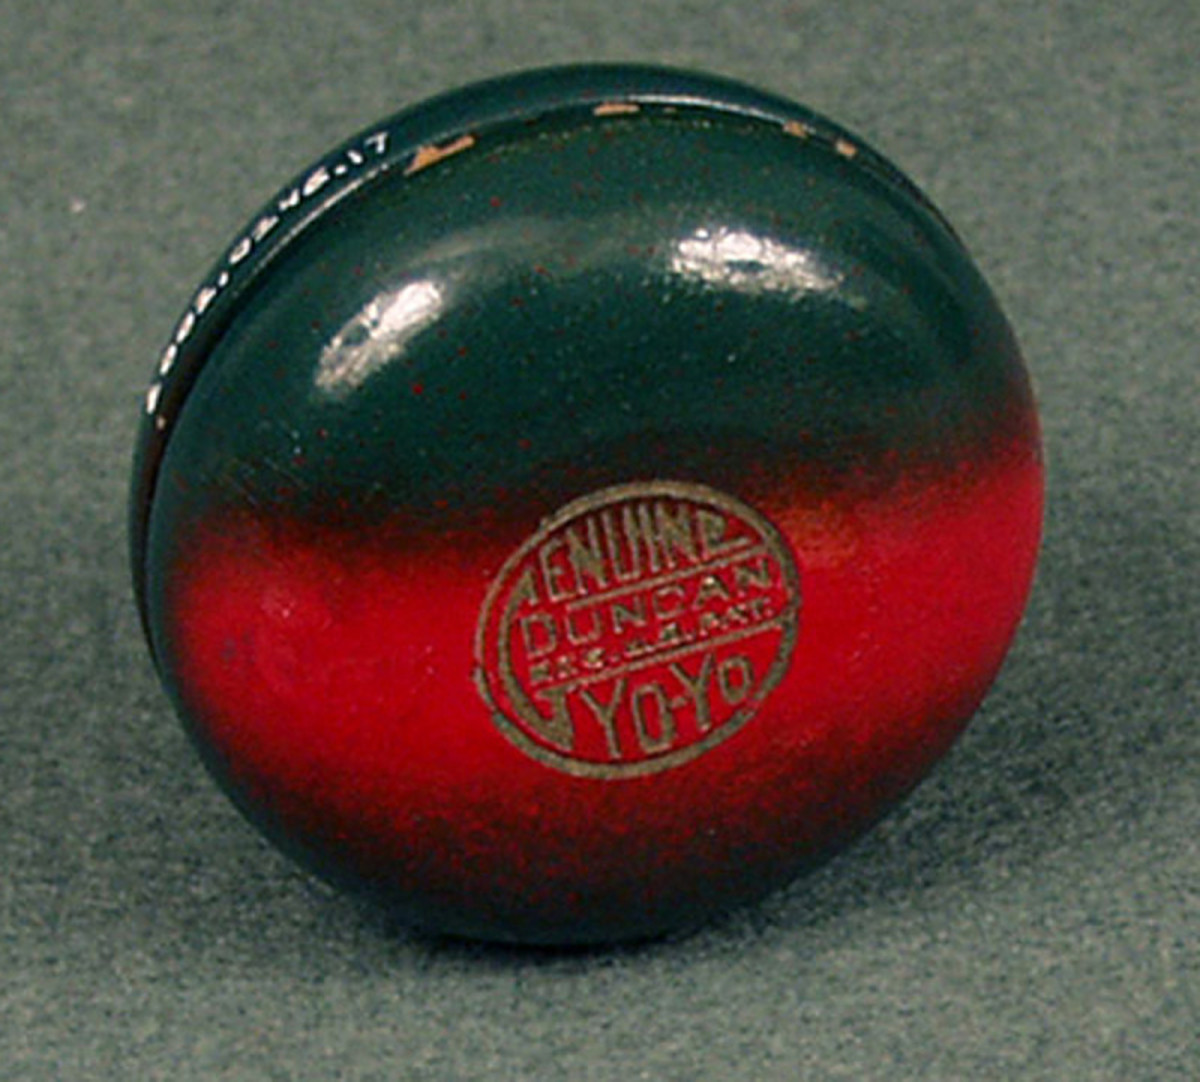 A wooden yo-yo made by the Duncan Toys Company, 1930s. It has a green design with a broad red stripe. The seal reads “Genuine Duncan Yo-Yo, Reg. US Pat.” This is an early version of the Duncan Genuine Yo-Yo, produced soon after Donald Duncan bought the trademark term “yo-yo” from inventor Pedro Flores, and the seal is reminiscent of the one used by Flores.